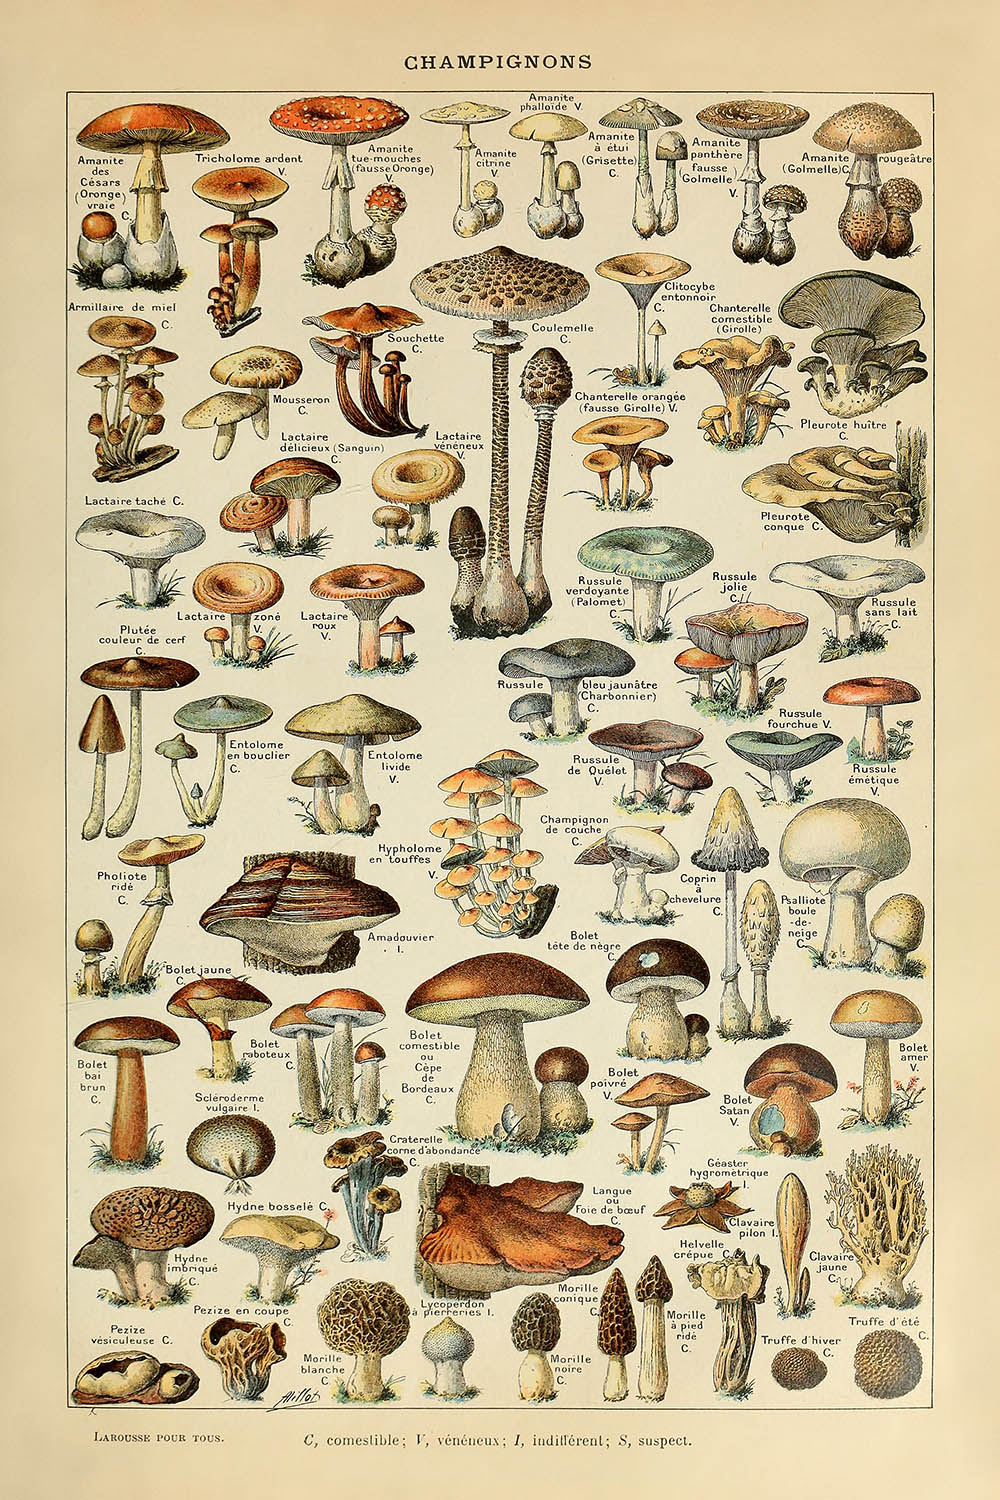 Champignons by Adolphe Millot, 1890